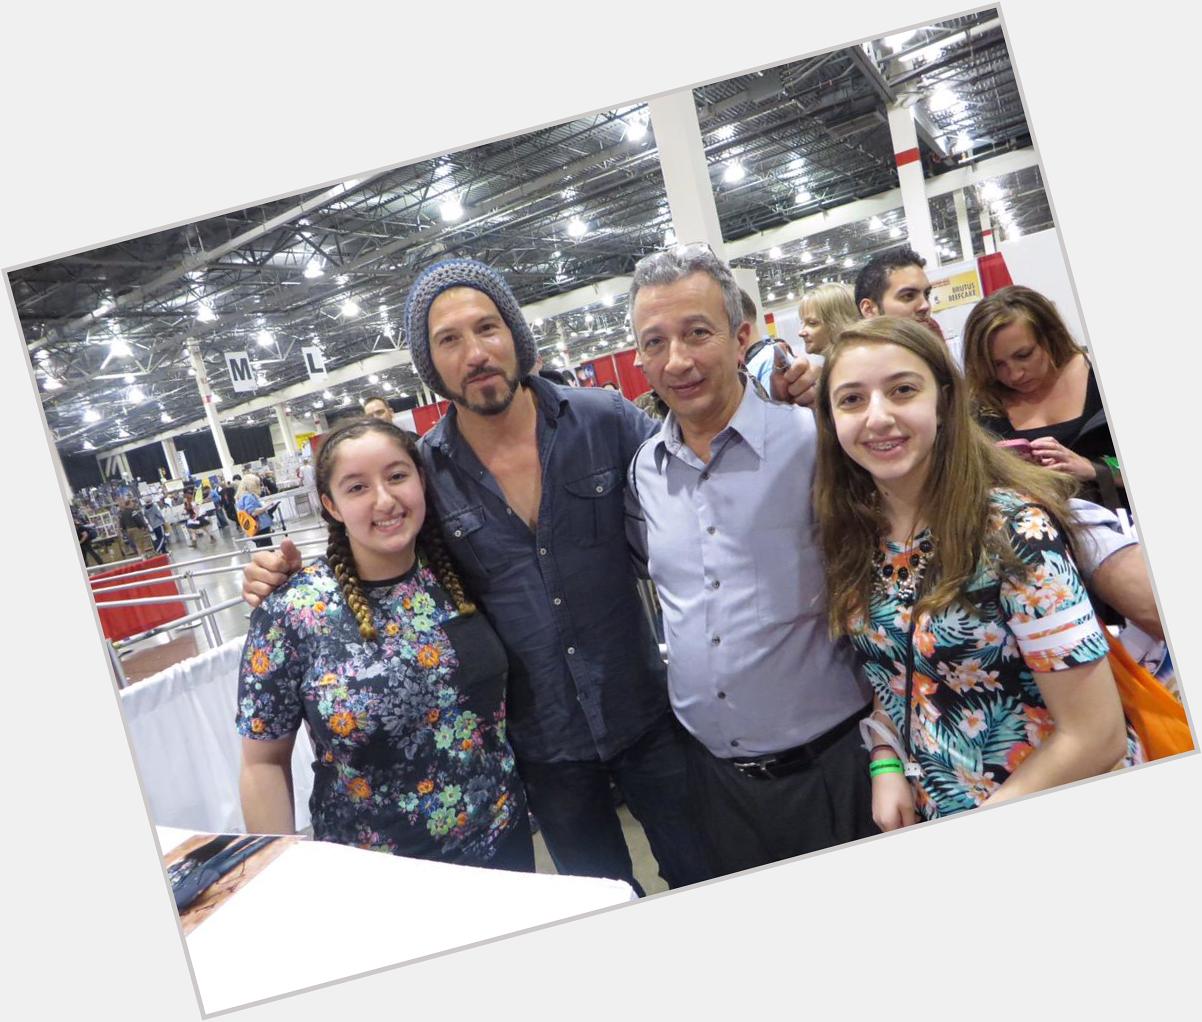 HAPPY BIRTHDAY TO ONE OF MY FAVORITE PEOPLE, JON BERNTHAL! IT WAS SO NICE MEETING YOU 